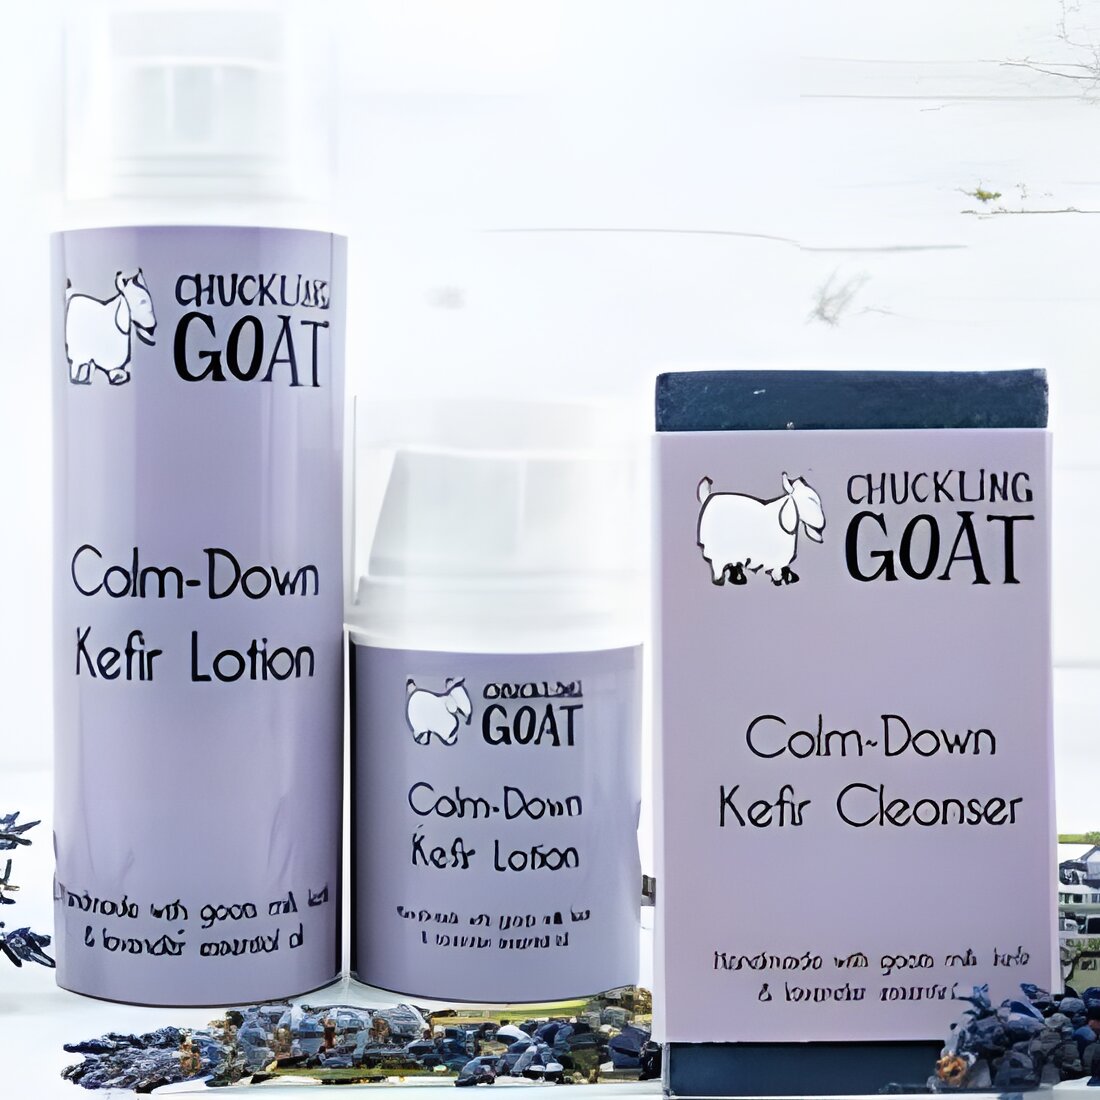 Free Chuckling Goat Calm Down Soap and Lotion